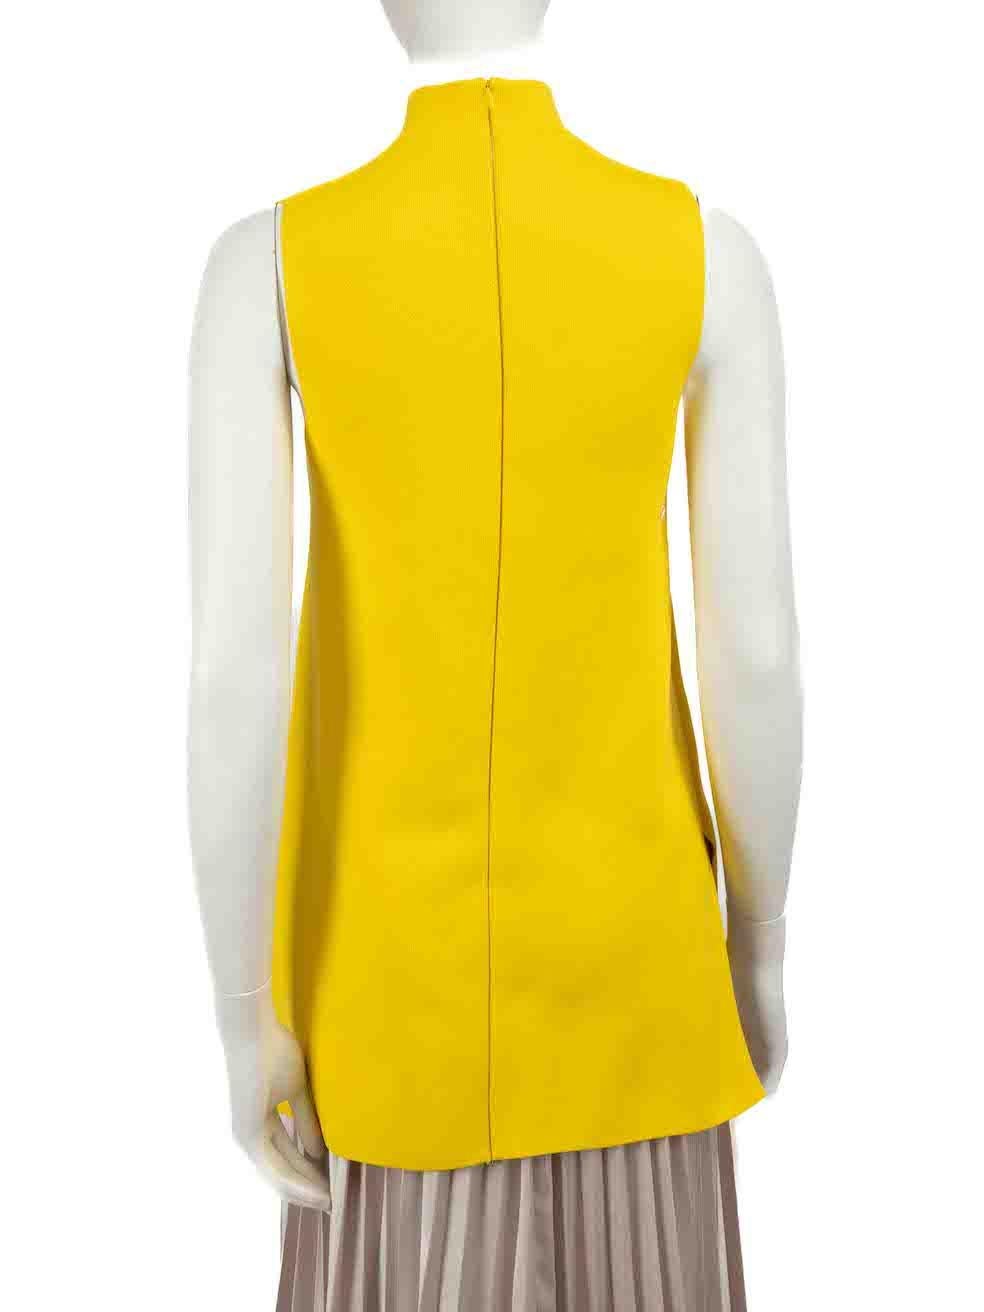 Marni Yellow Mock Neck Sleeveless Knit Top Size L In Good Condition For Sale In London, GB